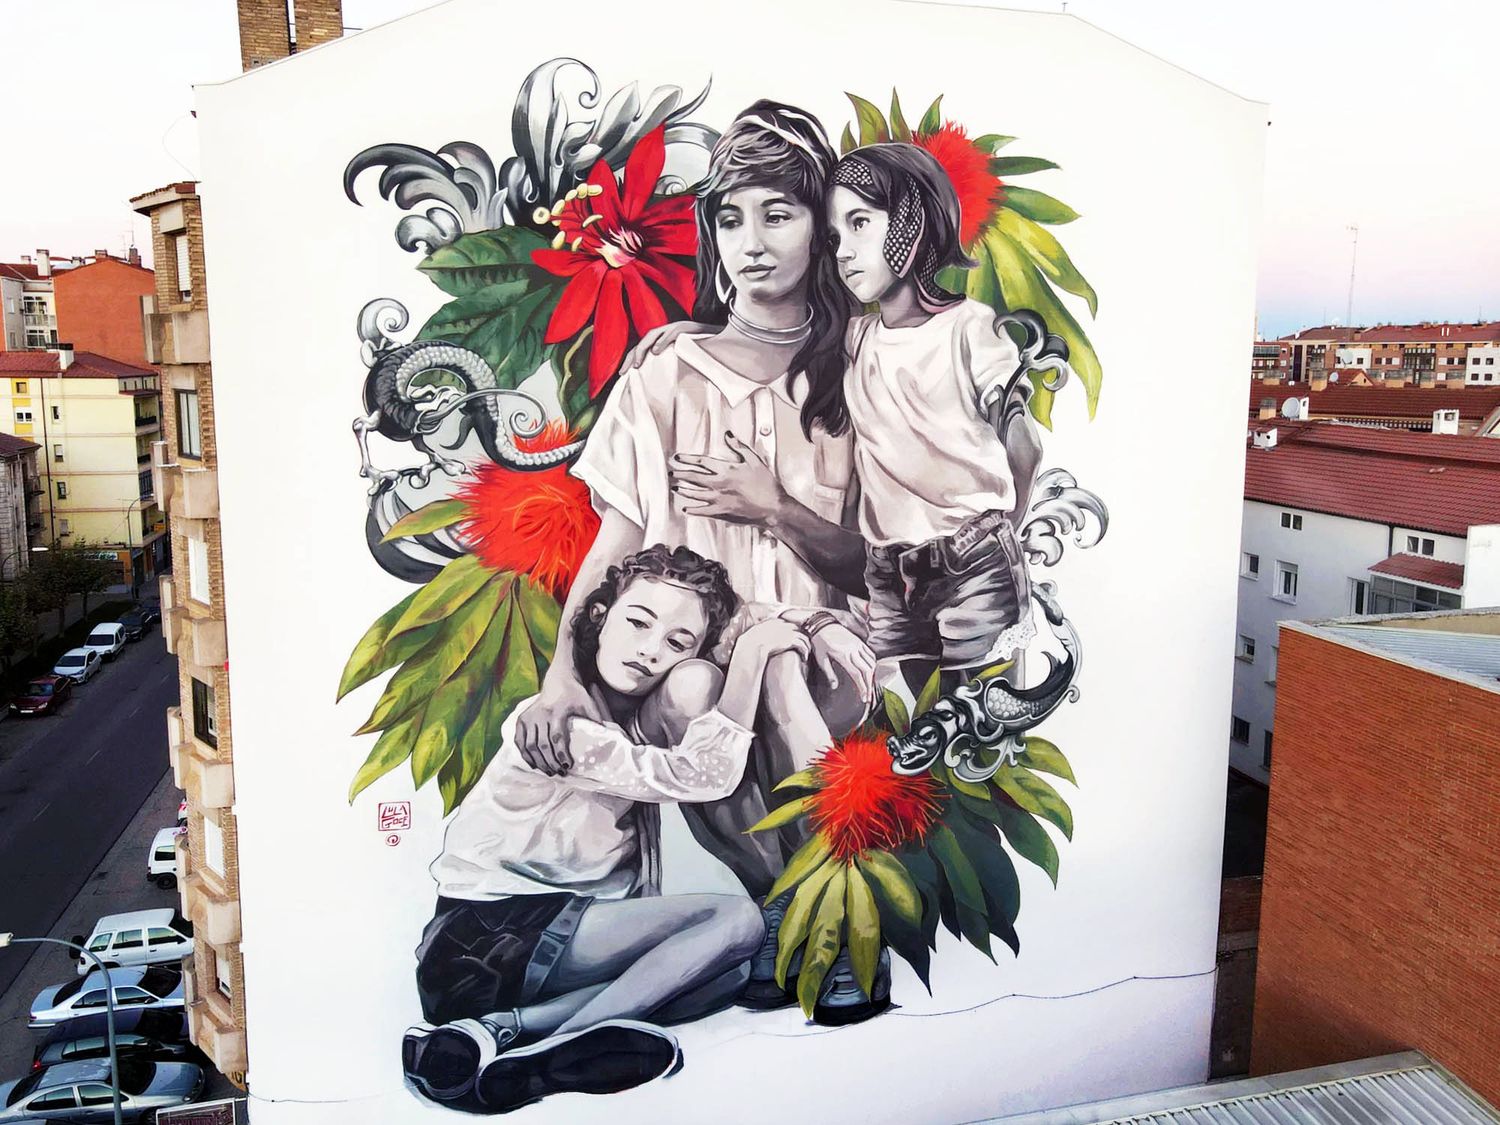 Lula Goce’s mural representing a family was made next to the North Health Center of Aranda de Duero in order to raise awareness about the fight against breast cancer (©Lula Goce).